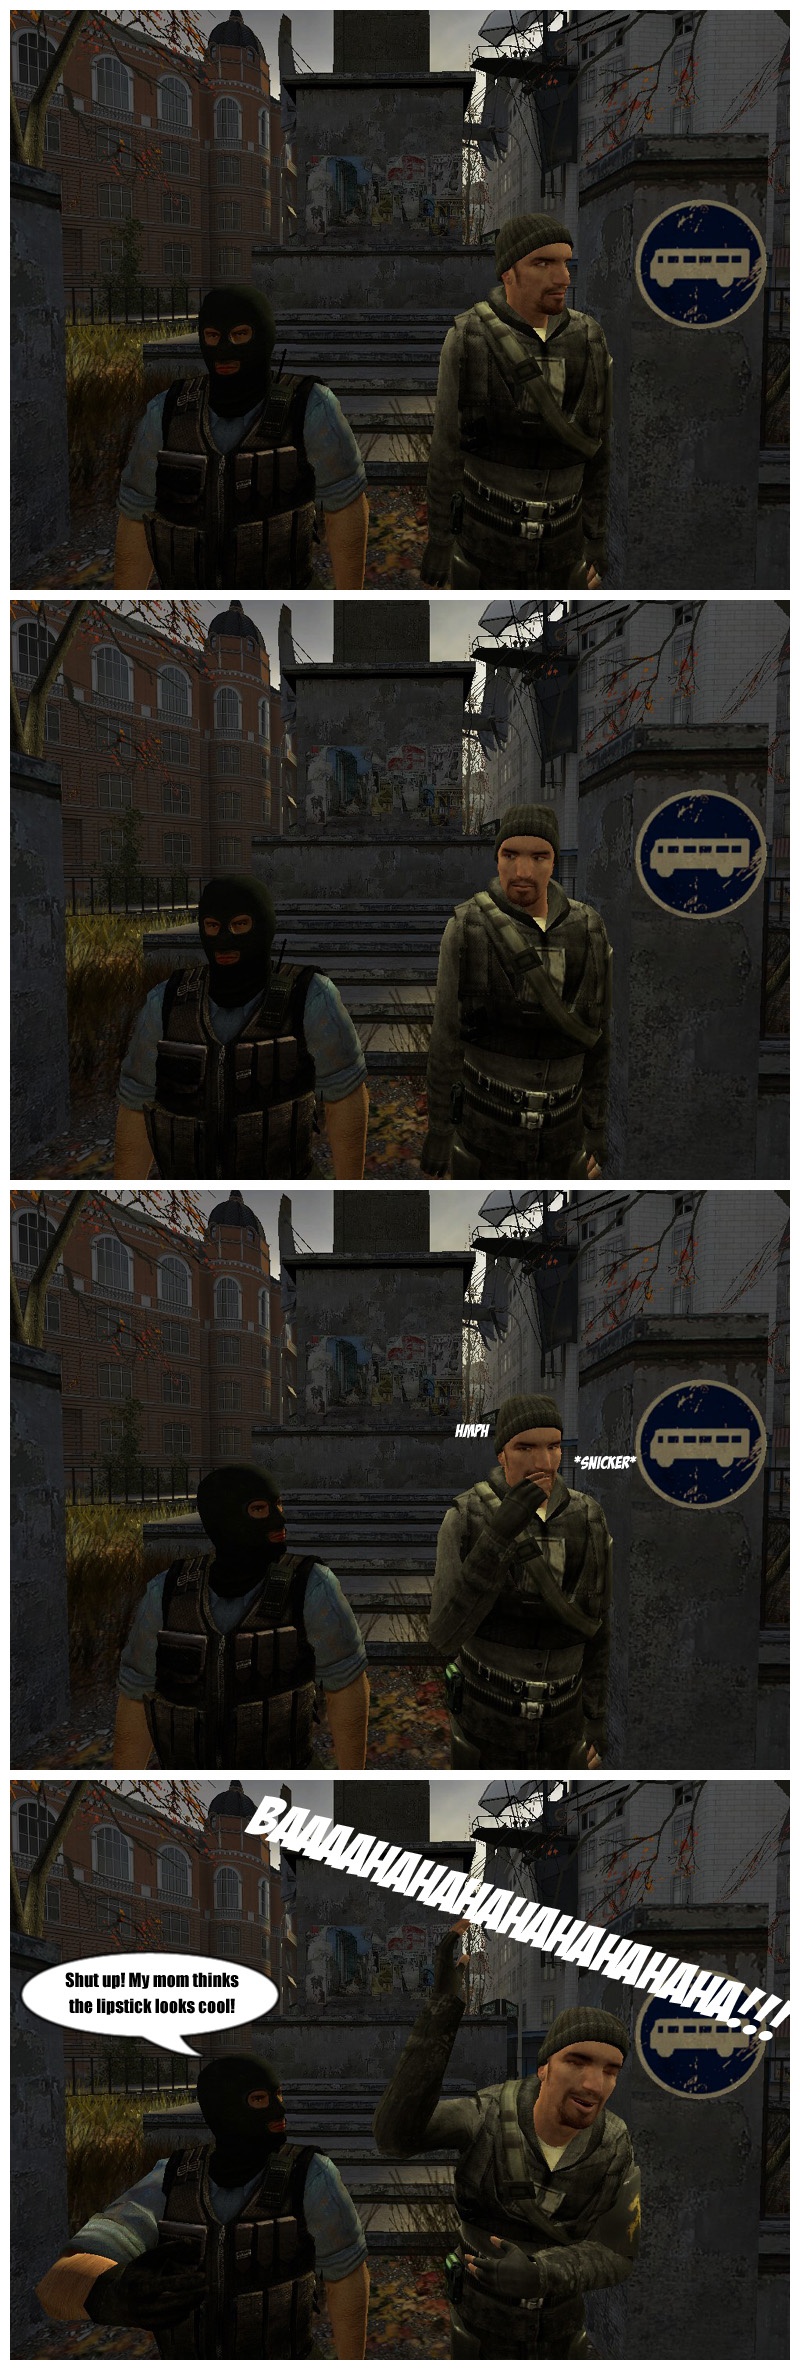 Jeff and a terrorist from Counter-Strike are standing at a bus stop, waiting. Jeff looks at the terrorist and starts snickering. Jeff breaks out in laughter as the terrorist tells him to shut up and that his mom thinks the lipstick he's wearing looks cool. The end.